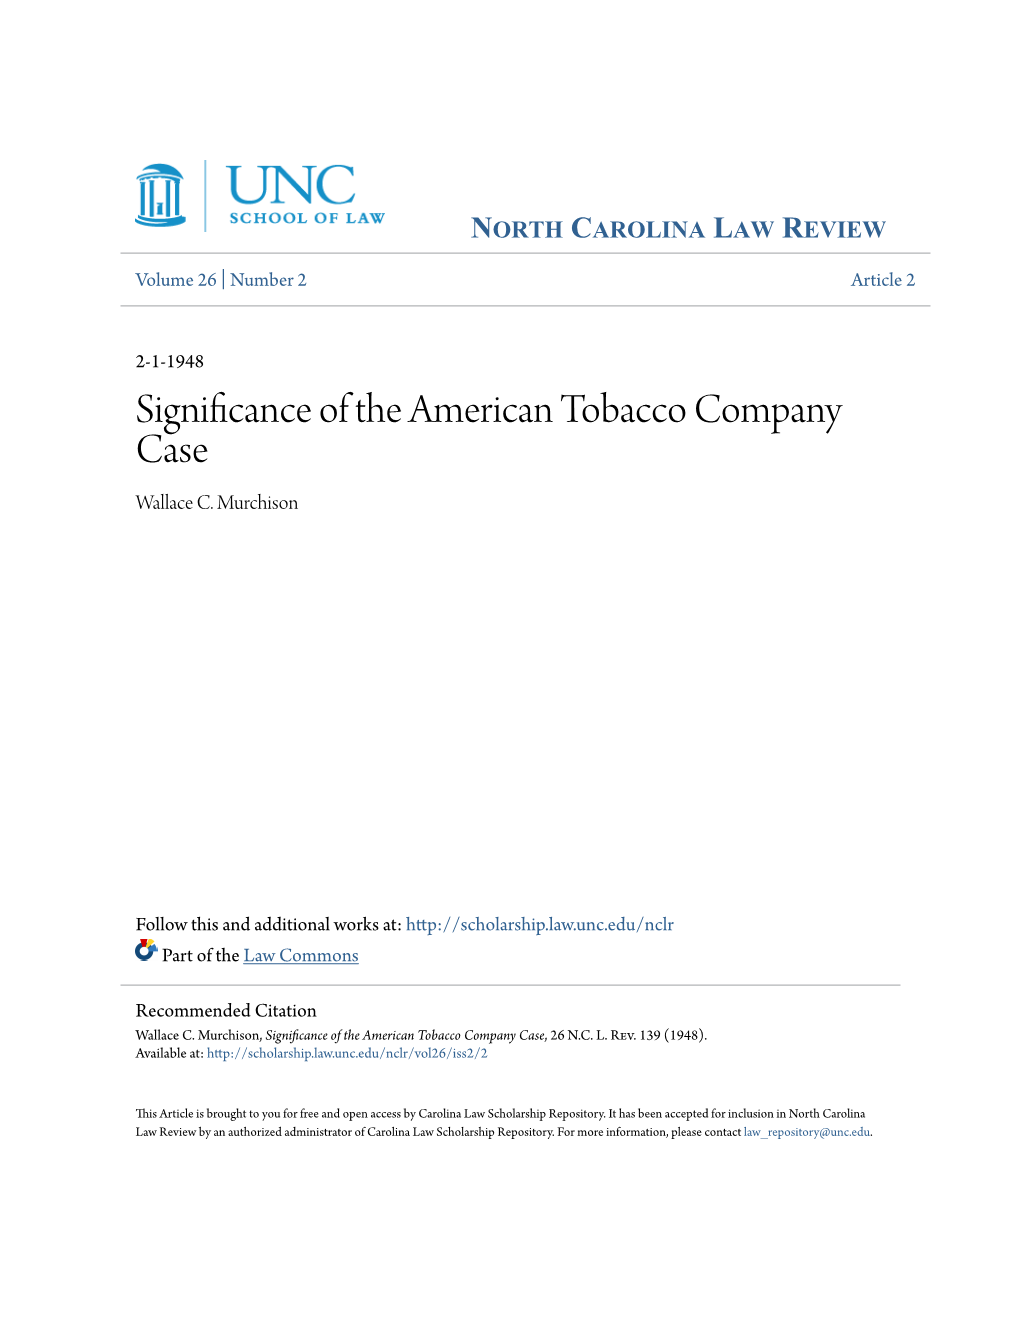 Significance of the American Tobacco Company Case Wallace C